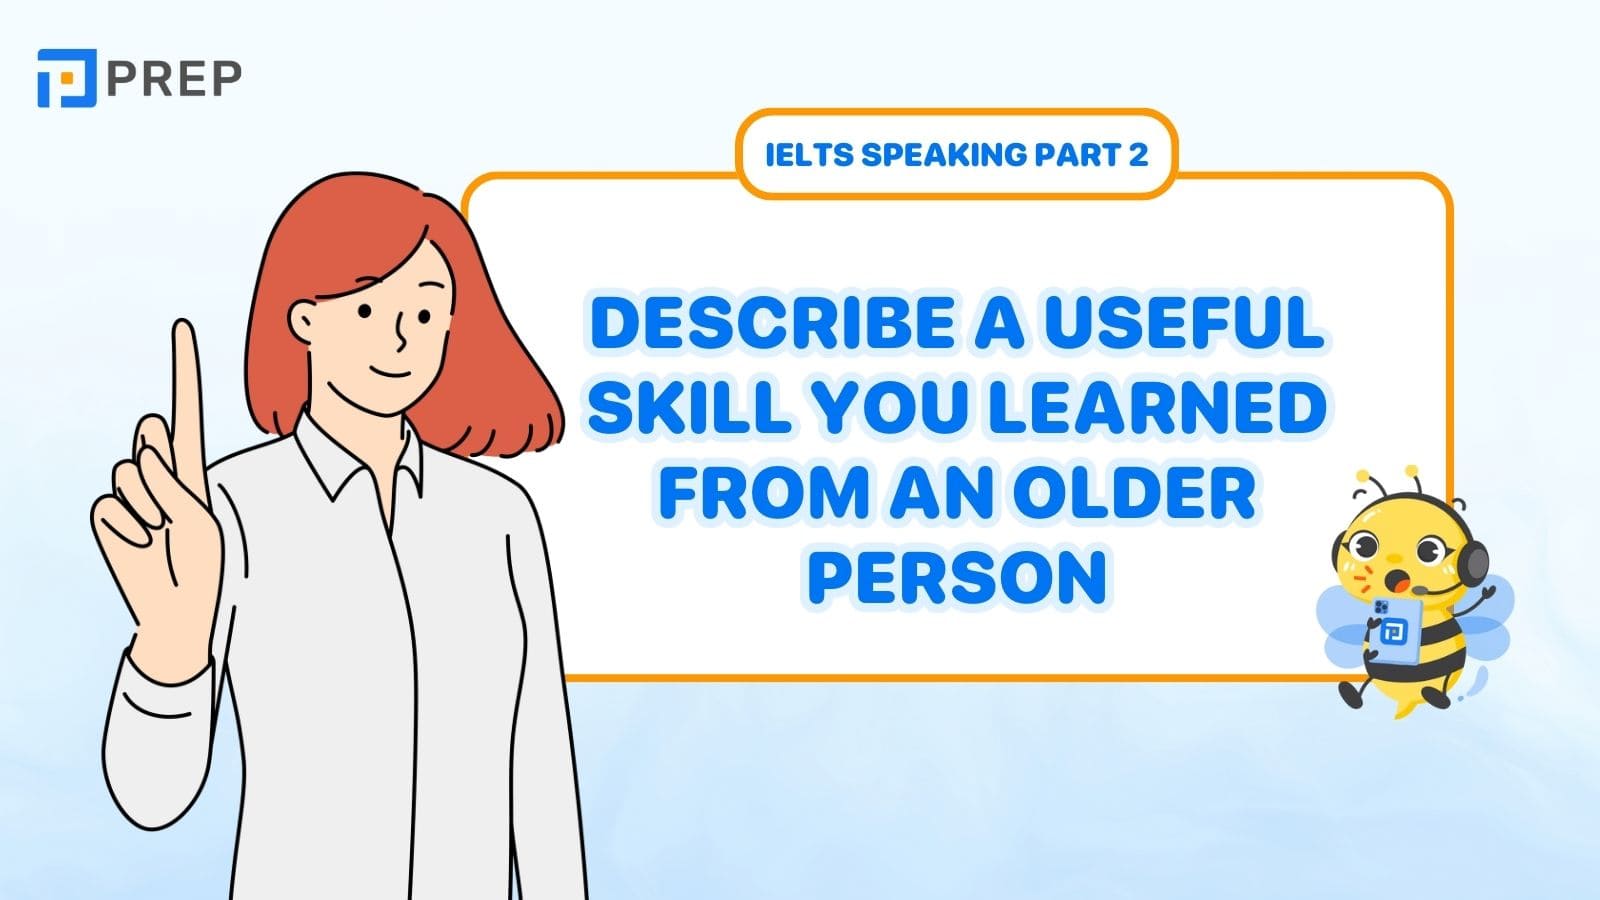 Describe a useful skill you learned form an older person